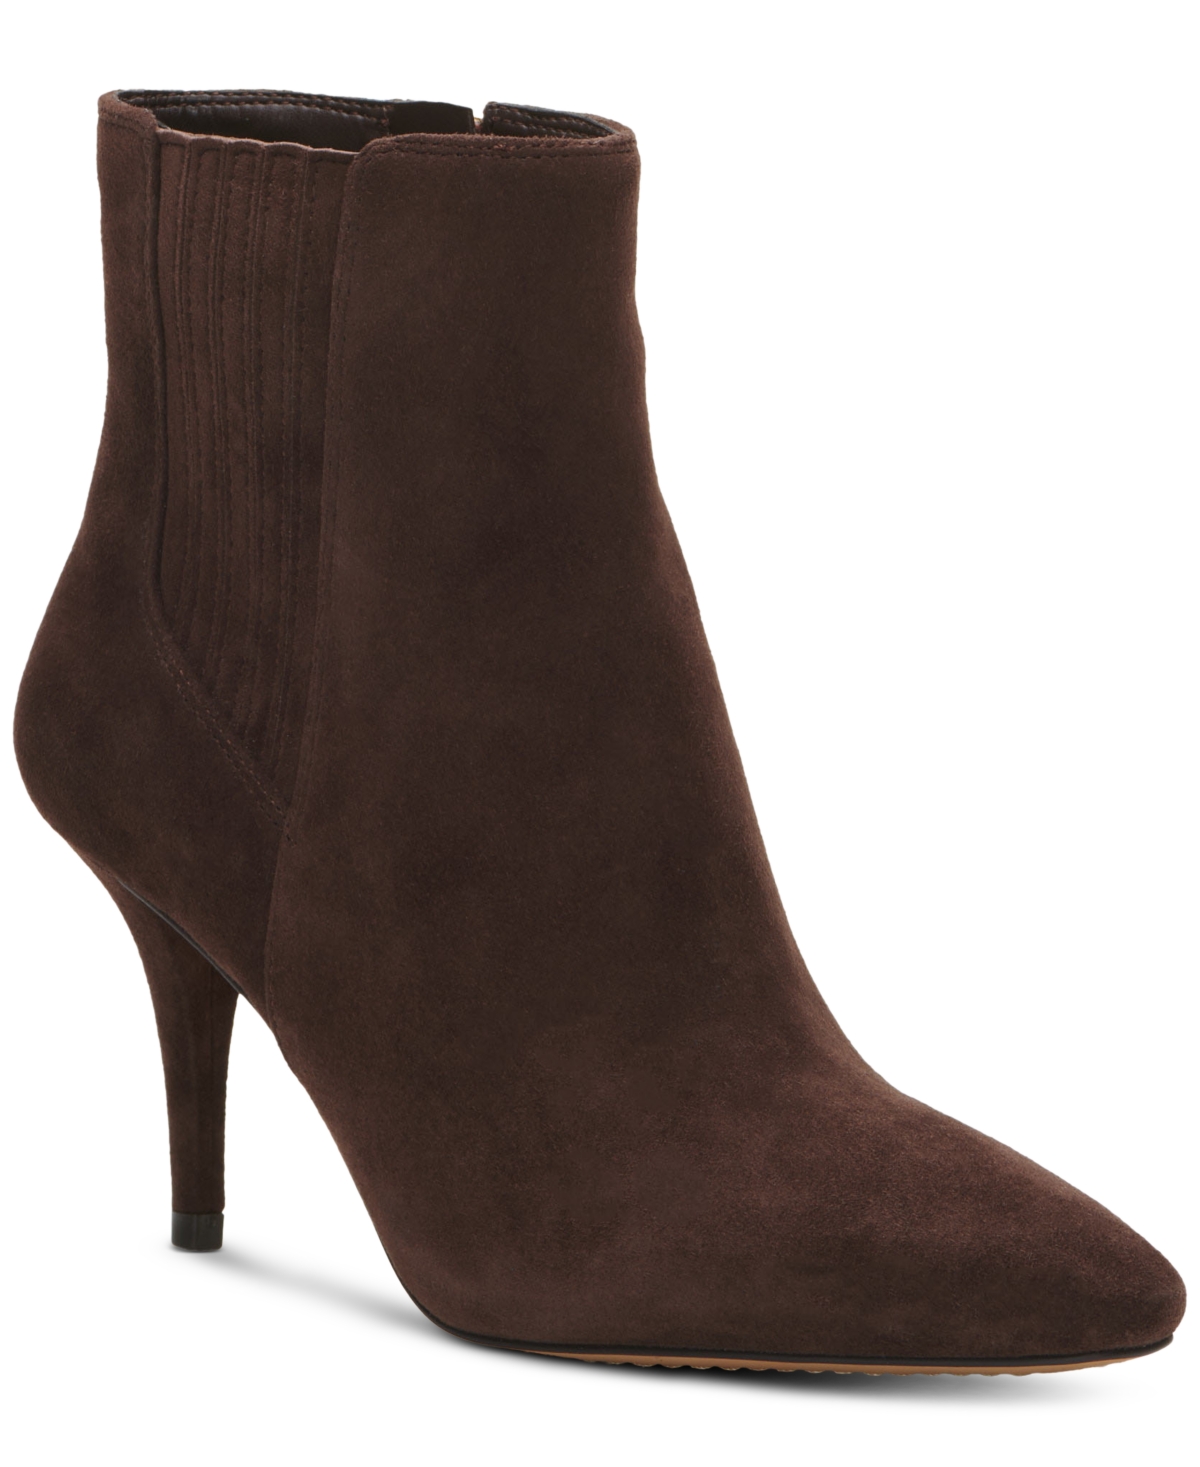 VINCE CAMUTO WOMEN'S AMBIND DRESS BOOTIES WOMEN'S SHOES